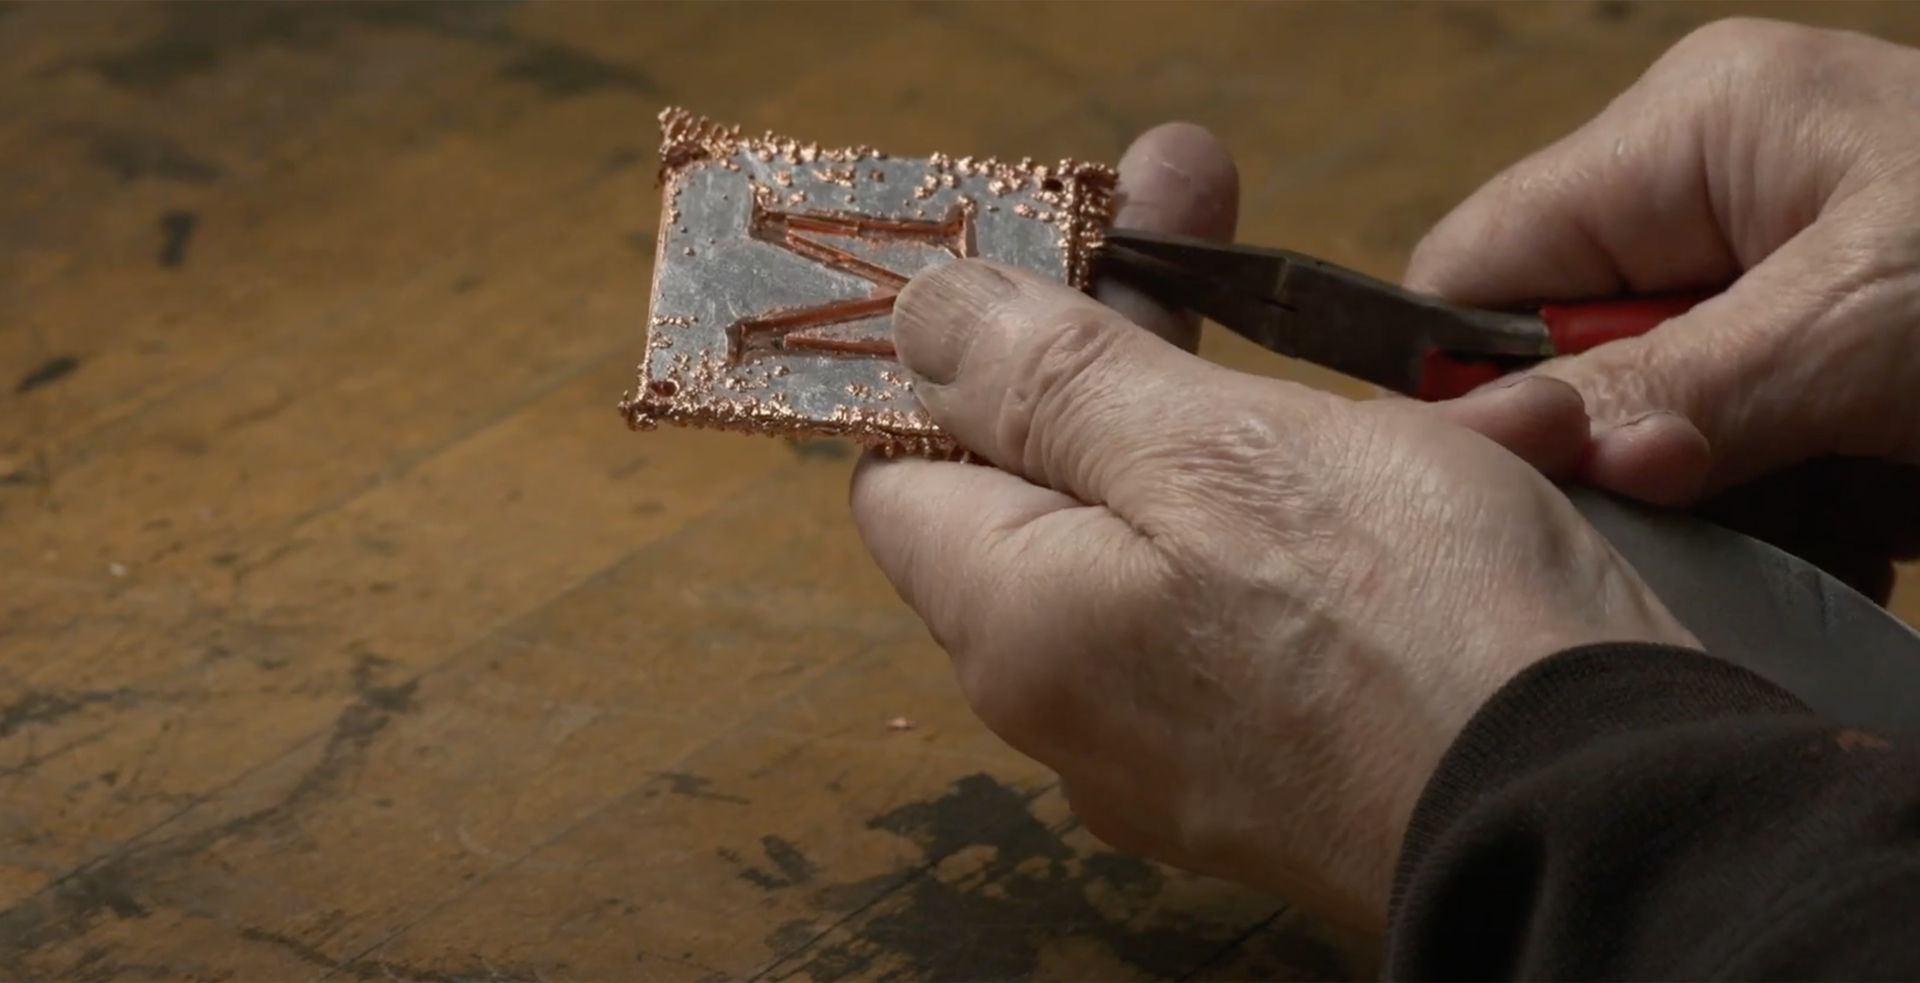  An artisan uses pliers to clip off dendrites of excess copper branching off the surface of a small square silver plate with a copper-filled letter M design in the center.